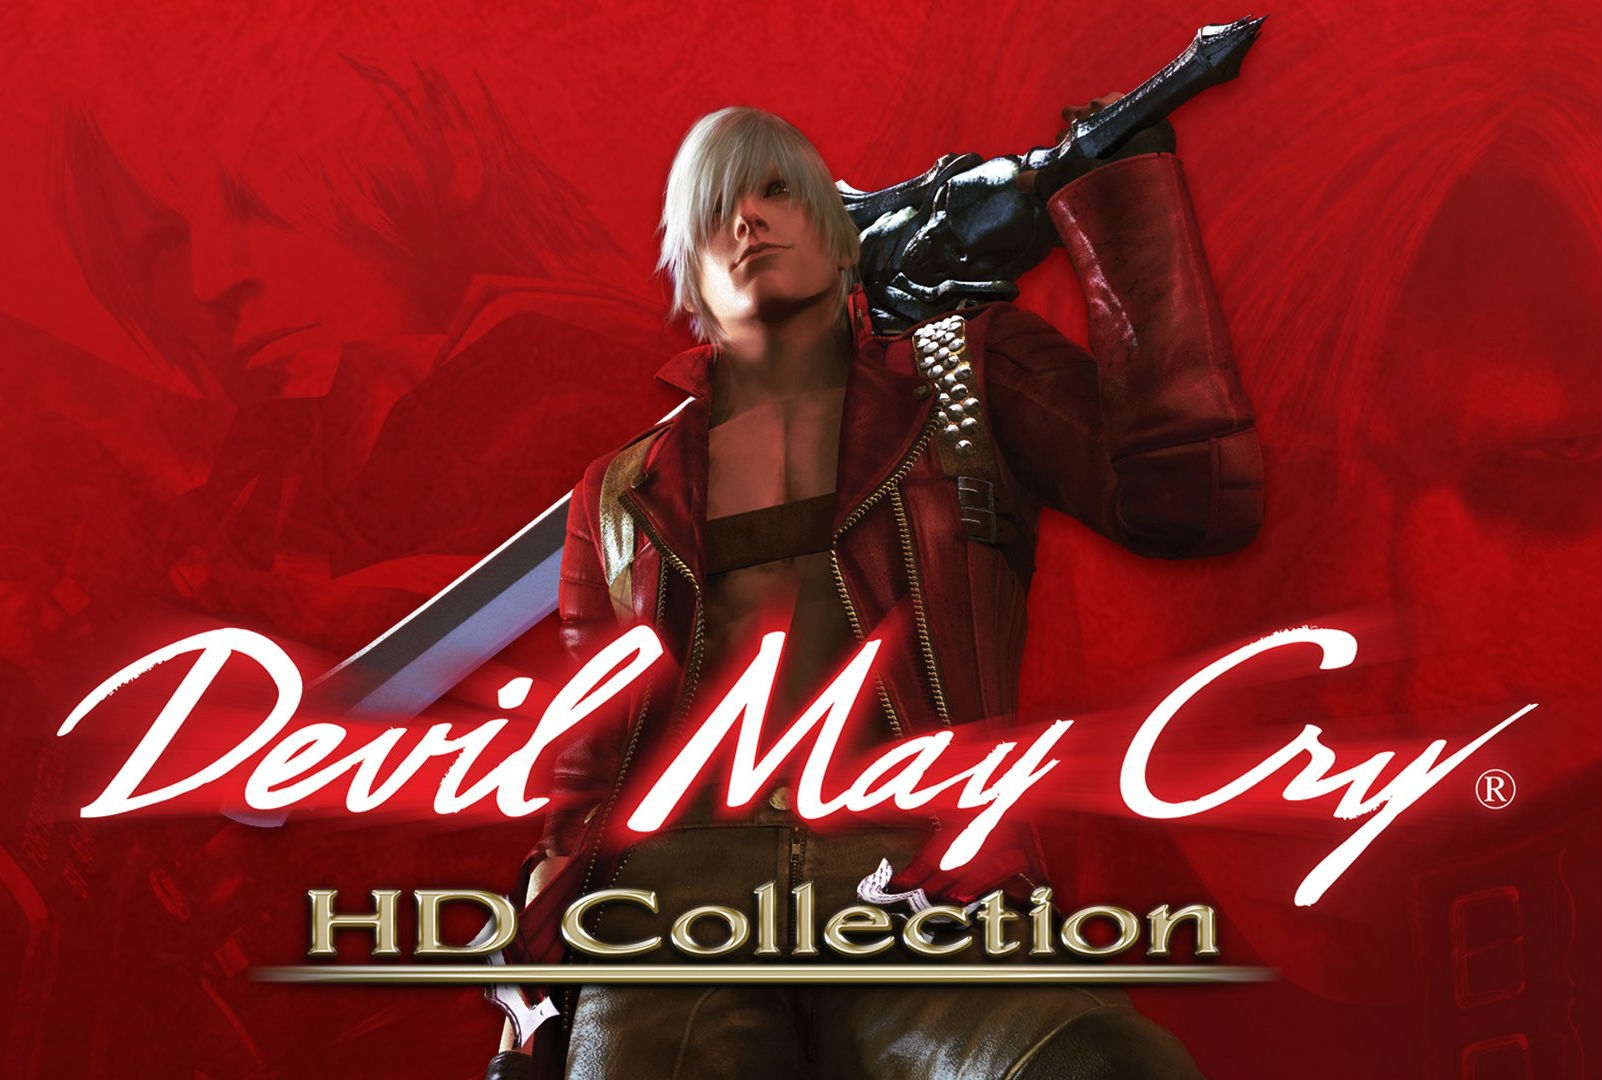 Devil may cry collection русификатор. Dante from Devil May Cry Series. Featuring Dante from Devil May Cry.